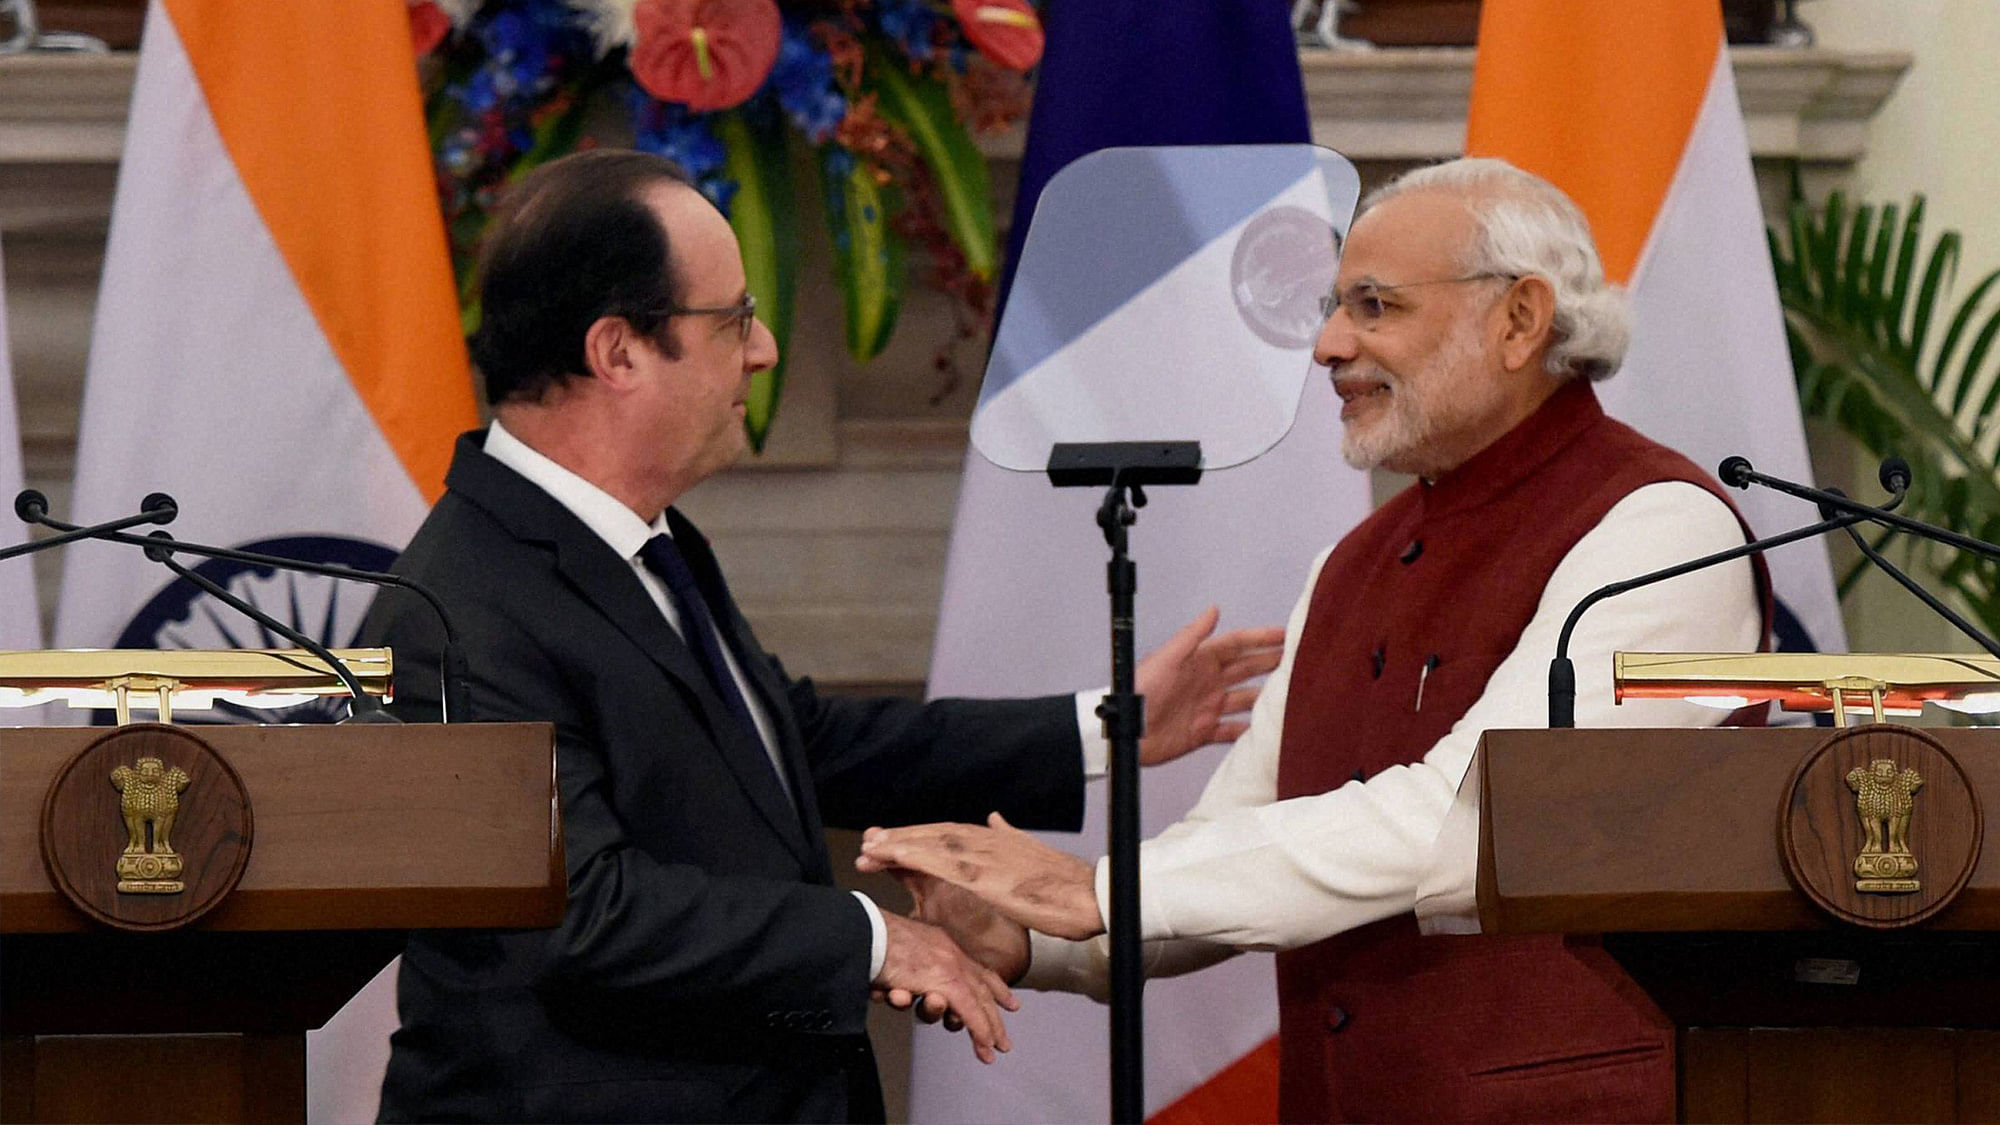  Prime Minister Narendra Modi and French President Francois Hollande after an MoU signing ceremony at Hyderabad House in New Delhi on Monday. (Photo: PTI)